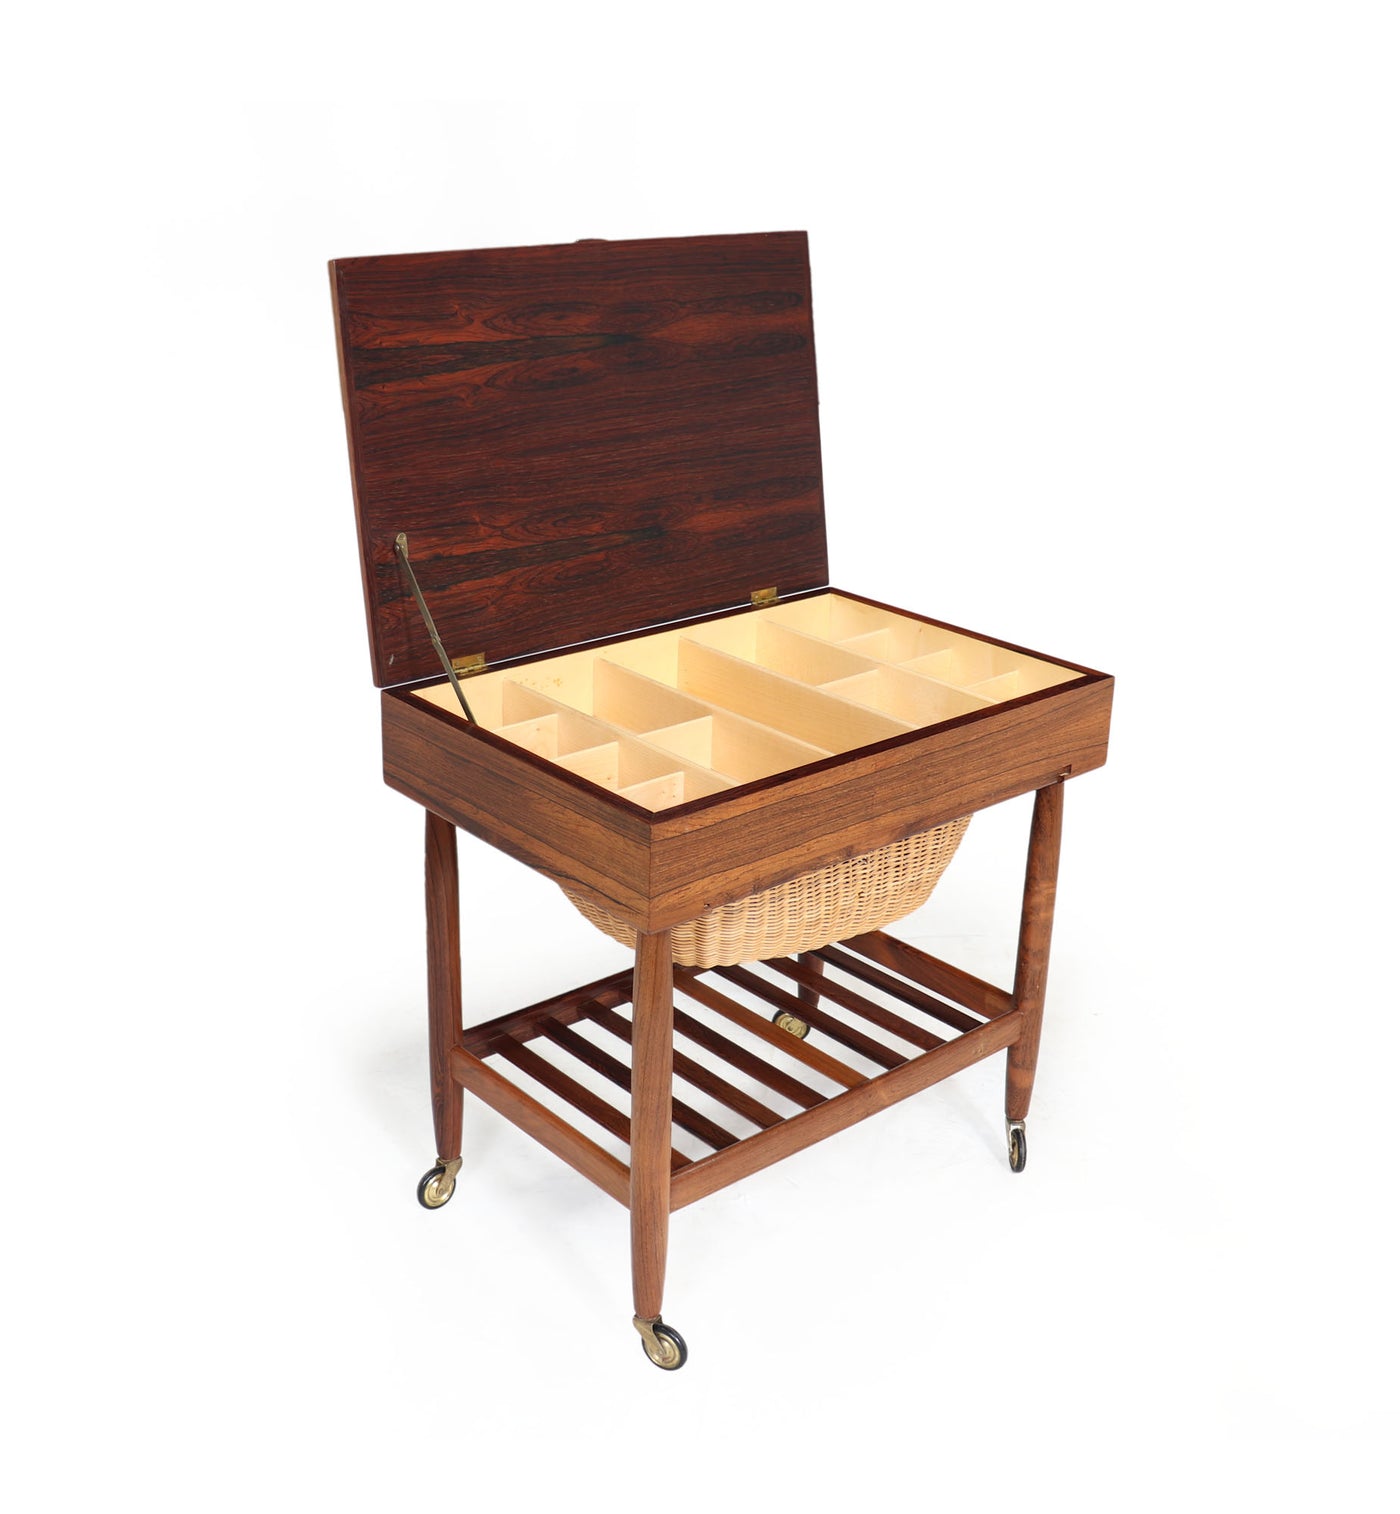 Danish Rosewood Sewing box by Ejvind Johansson c1960 open